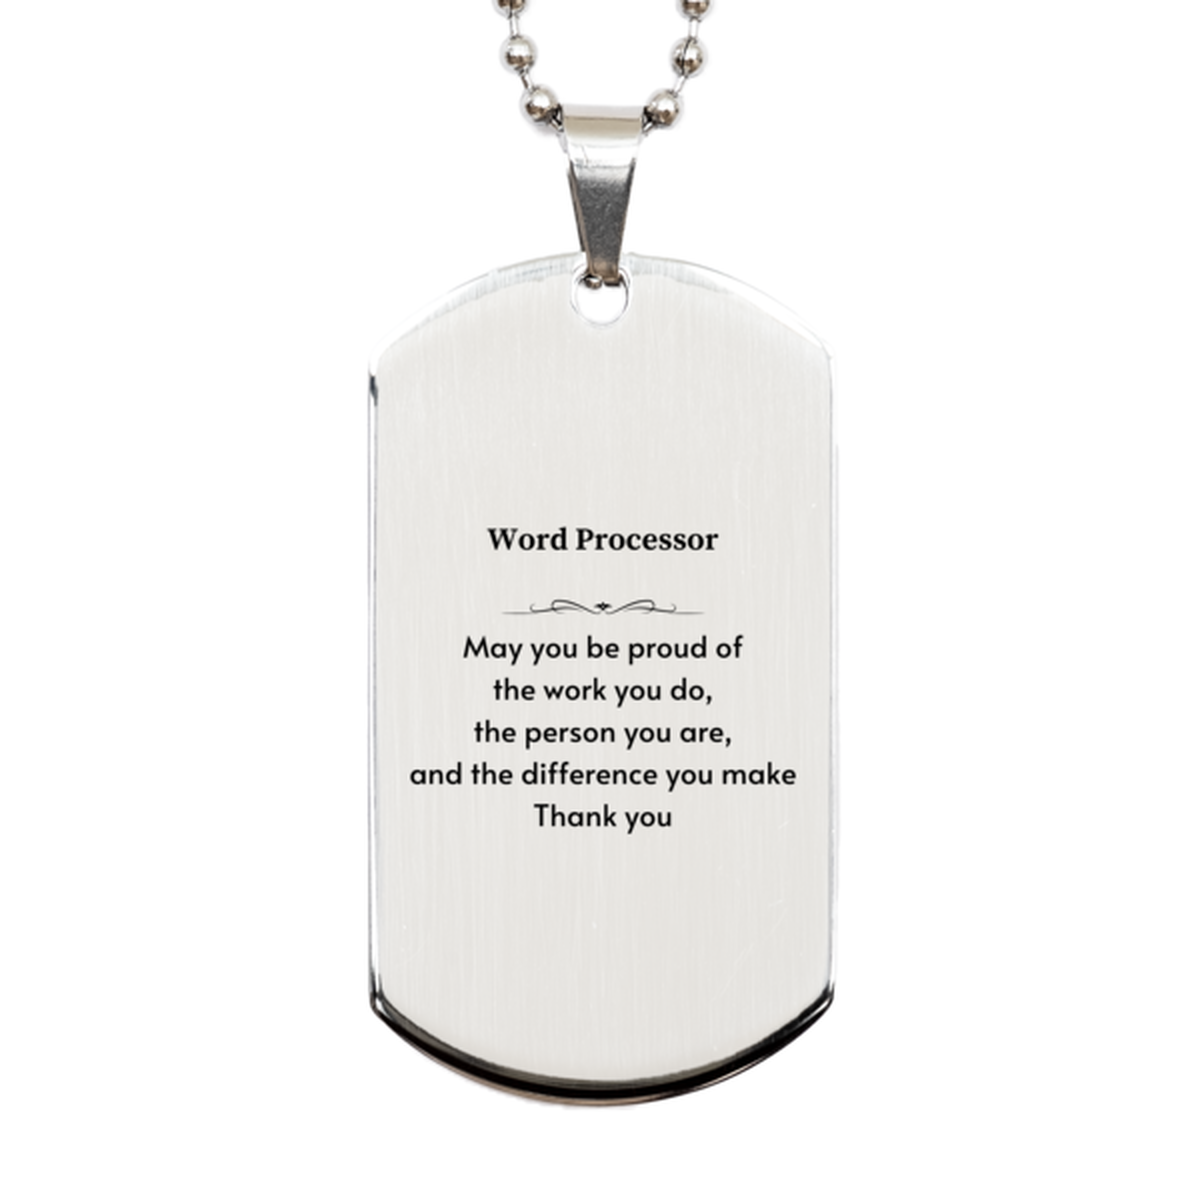 Heartwarming Silver Dog Tag Retirement Coworkers Gifts for Word Processor, Word Processor May You be proud of the work you do, the person you are Gifts for Boss Men Women Friends